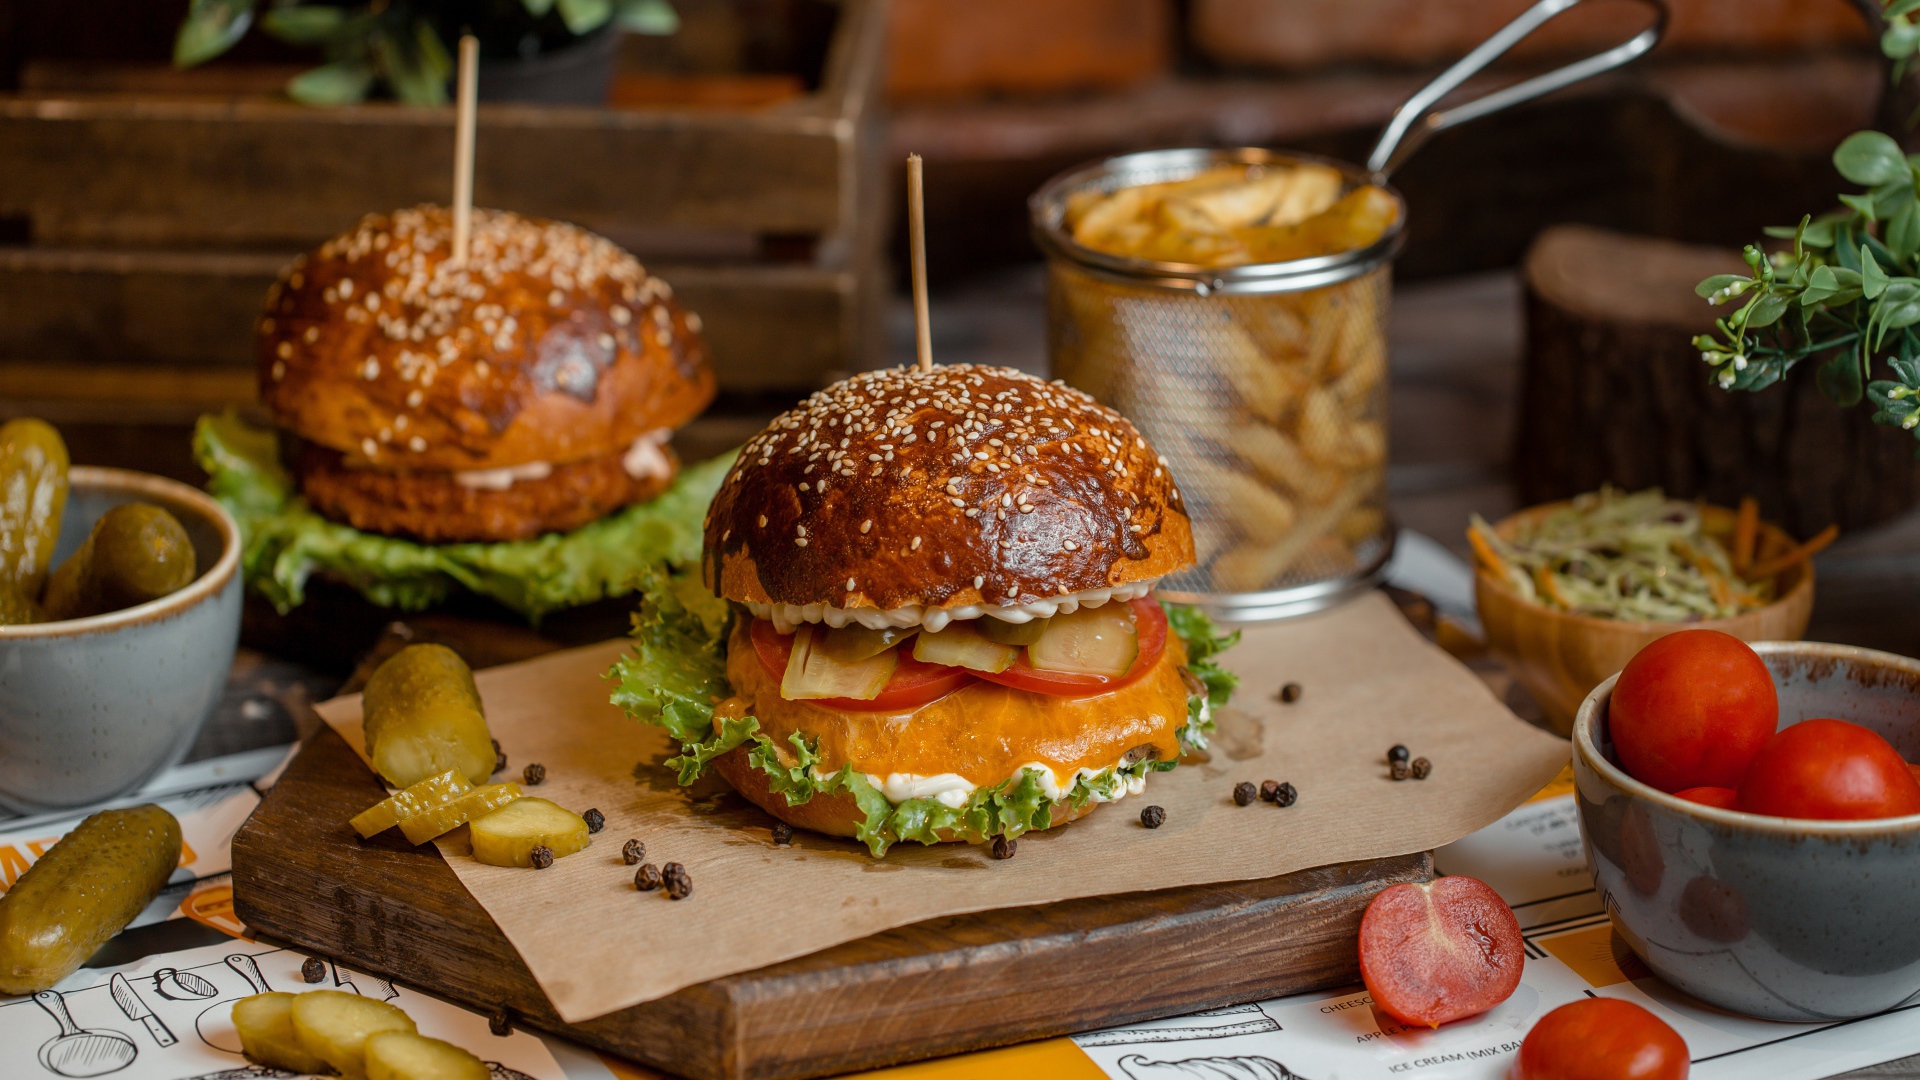 Hamburgers on the table with tomatoes, french fries and pickles